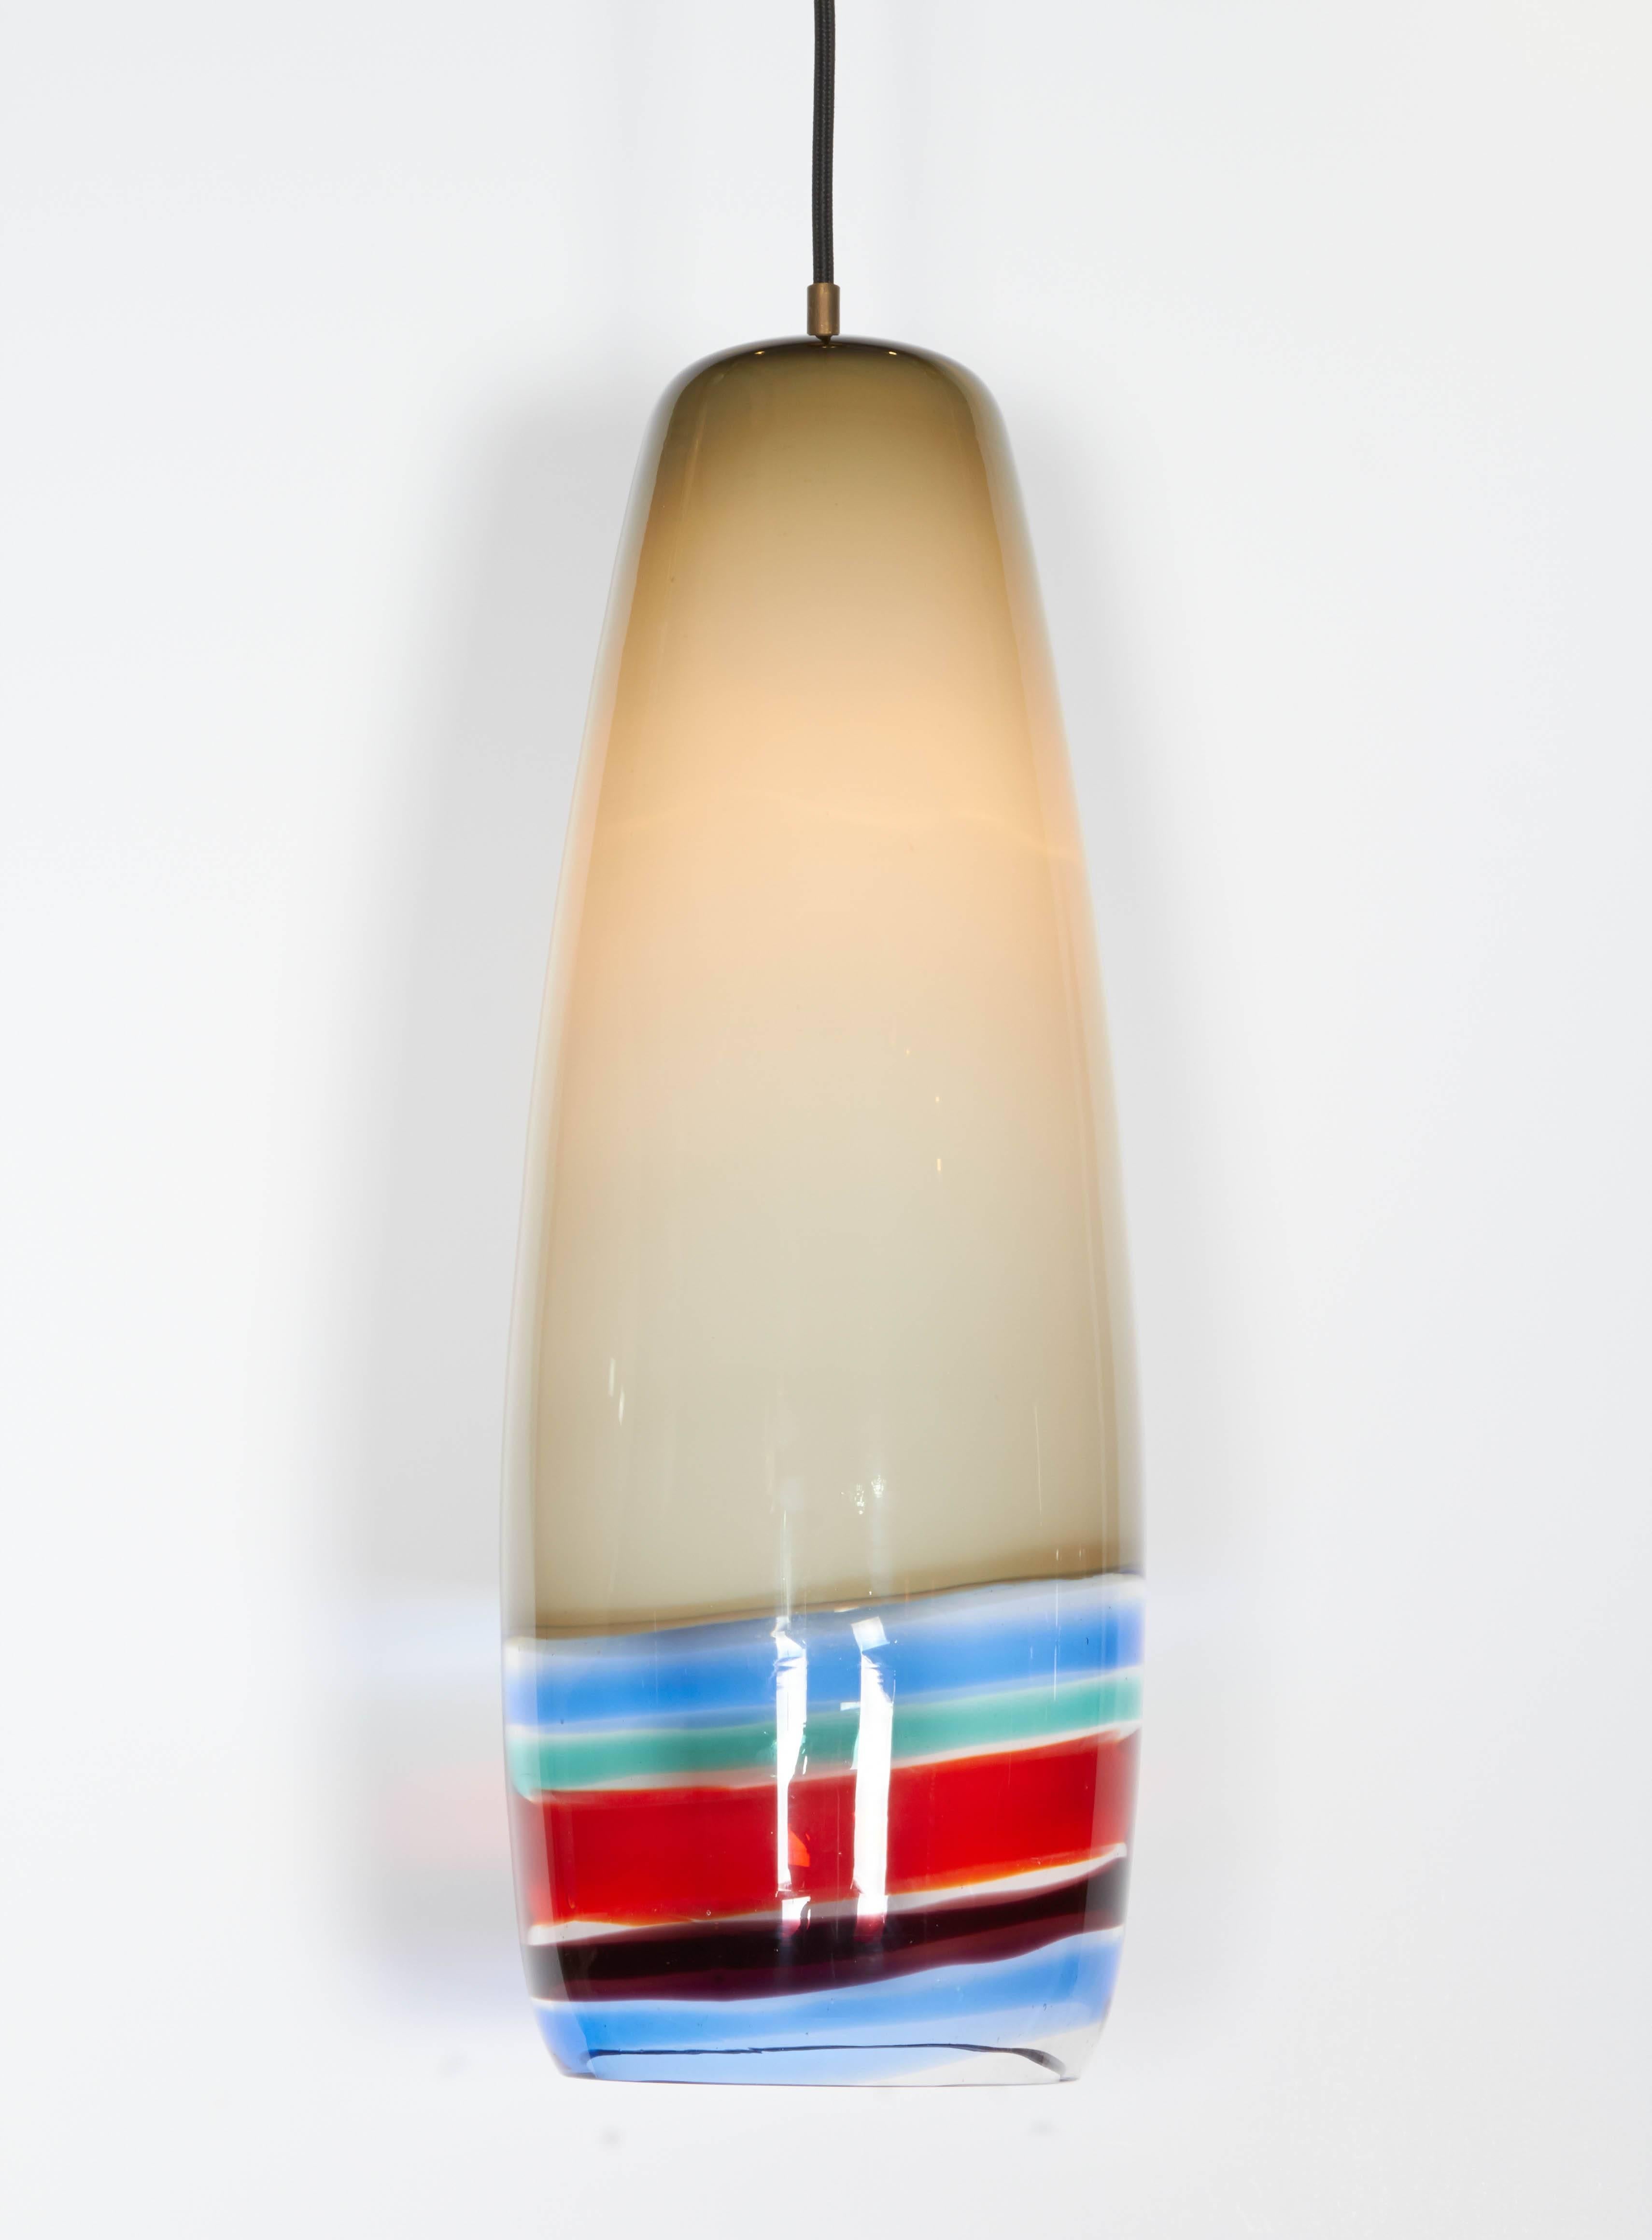 This ivory and color banded pendant lamp by Massimo Vignelli is ideal for a high ceilinged entry way. The bands of color adds a cheerfulness to the design.